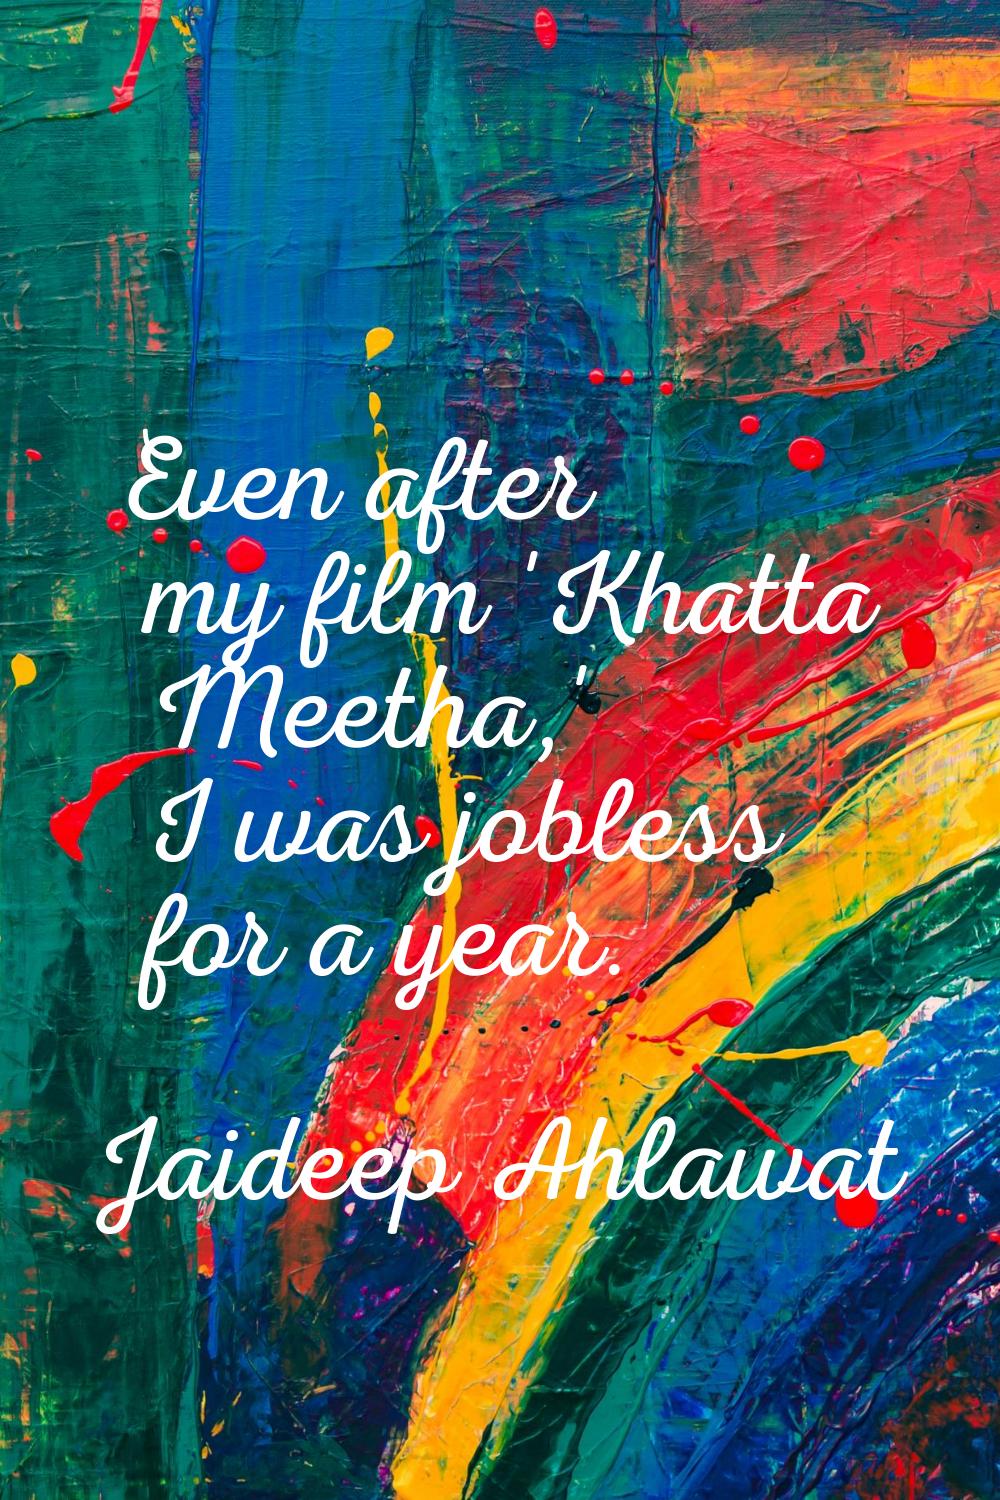 Even after my film 'Khatta Meetha,' I was jobless for a year.